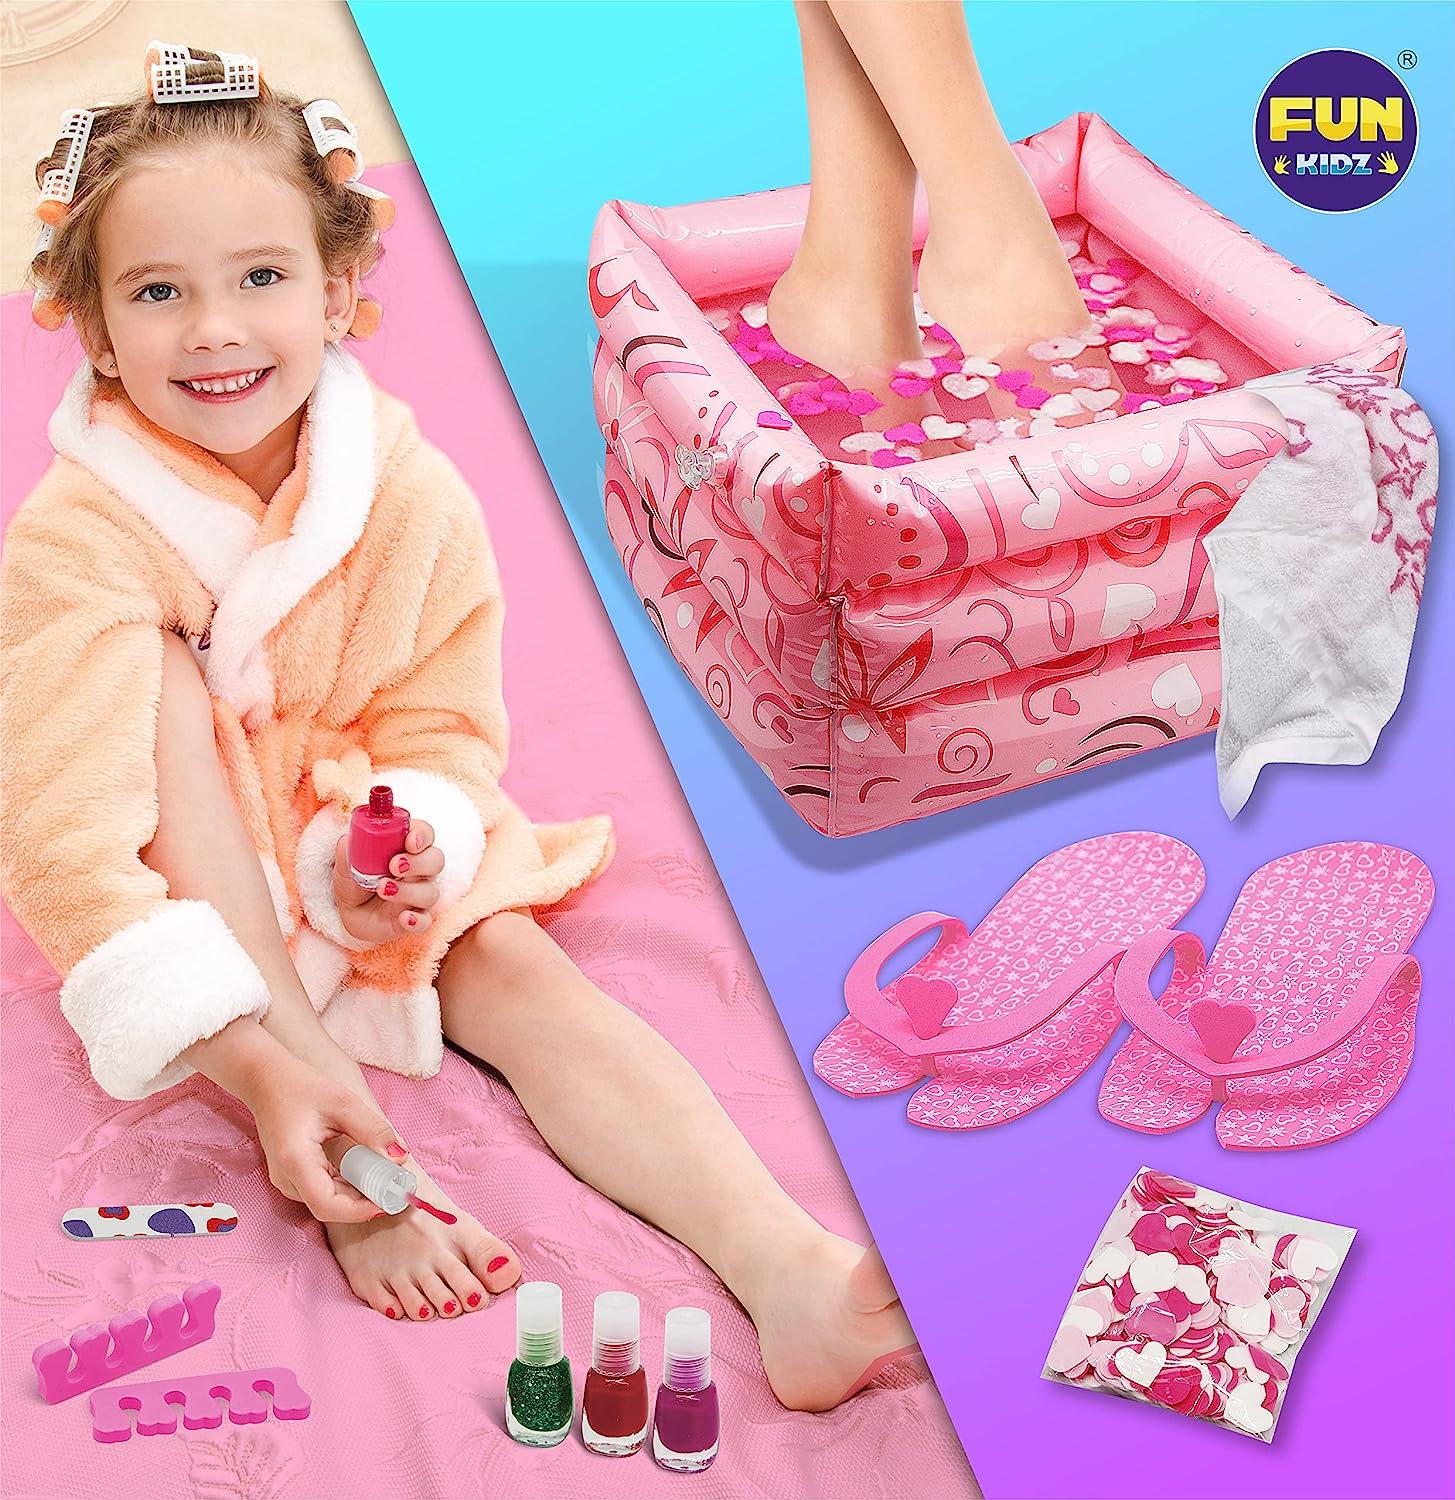  Kids Spa Kit for Girl, Nail Kit for Kids, Toys for Girls Age 7  8 9 10 11 12, Girls Birthday Gifts, Sleepover Party Supplies for Girls with  Inflatable Pedicure Tub